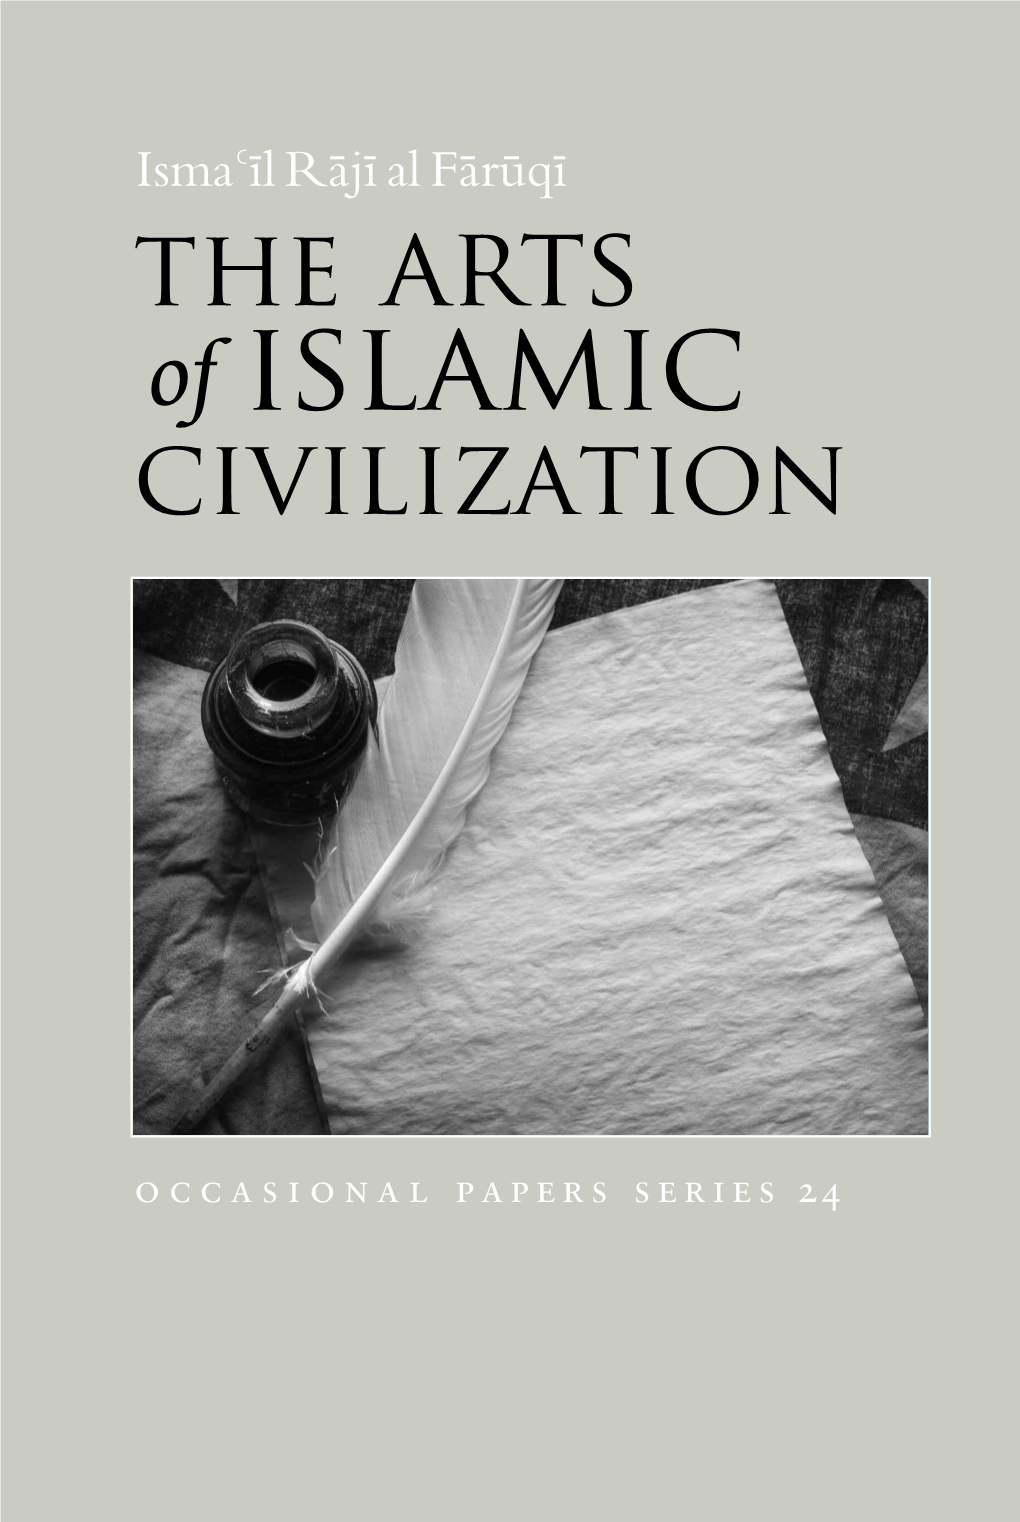 The Arts of Islamic Civilization Should Also Be Viewed As Aesthetic Expressions of Similar Derivation and Realization